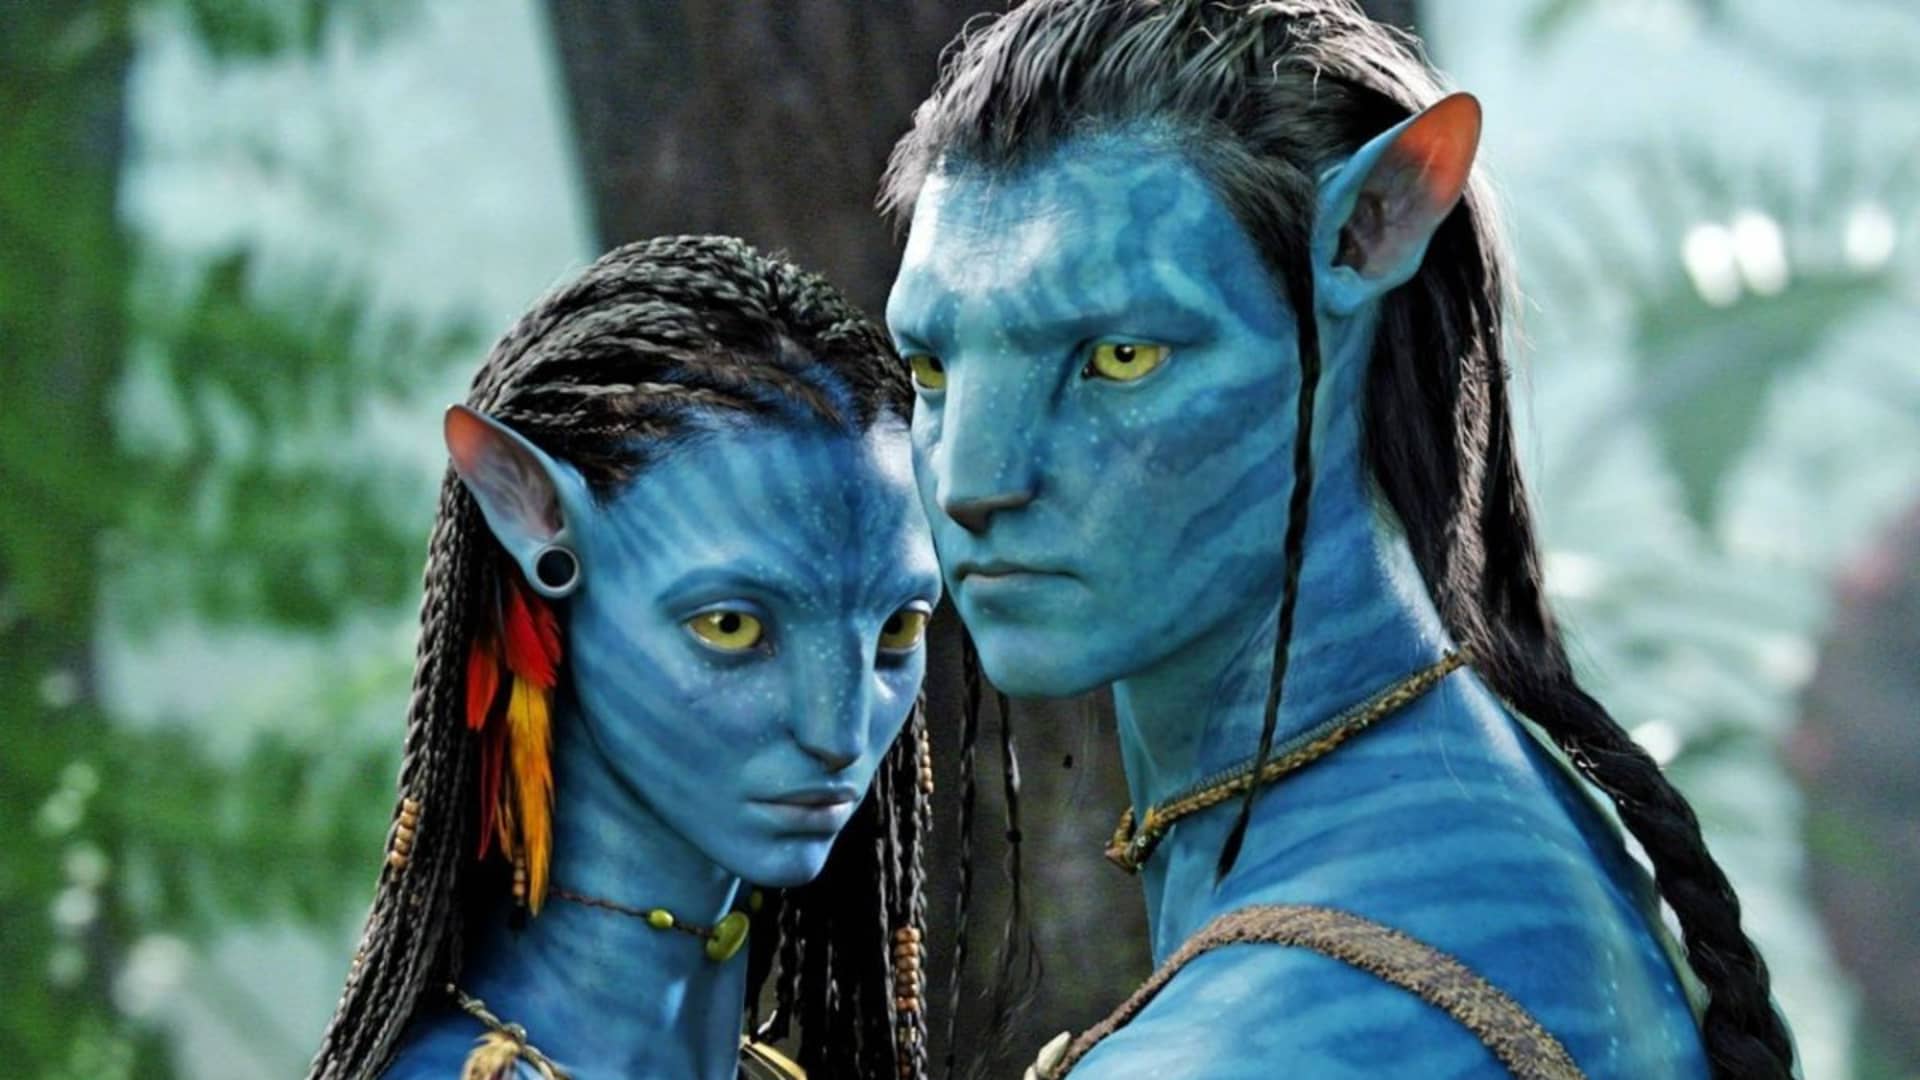 ‘Avatar’ returns to theaters as Disney hypes James Cameron’s long-delayed sequel